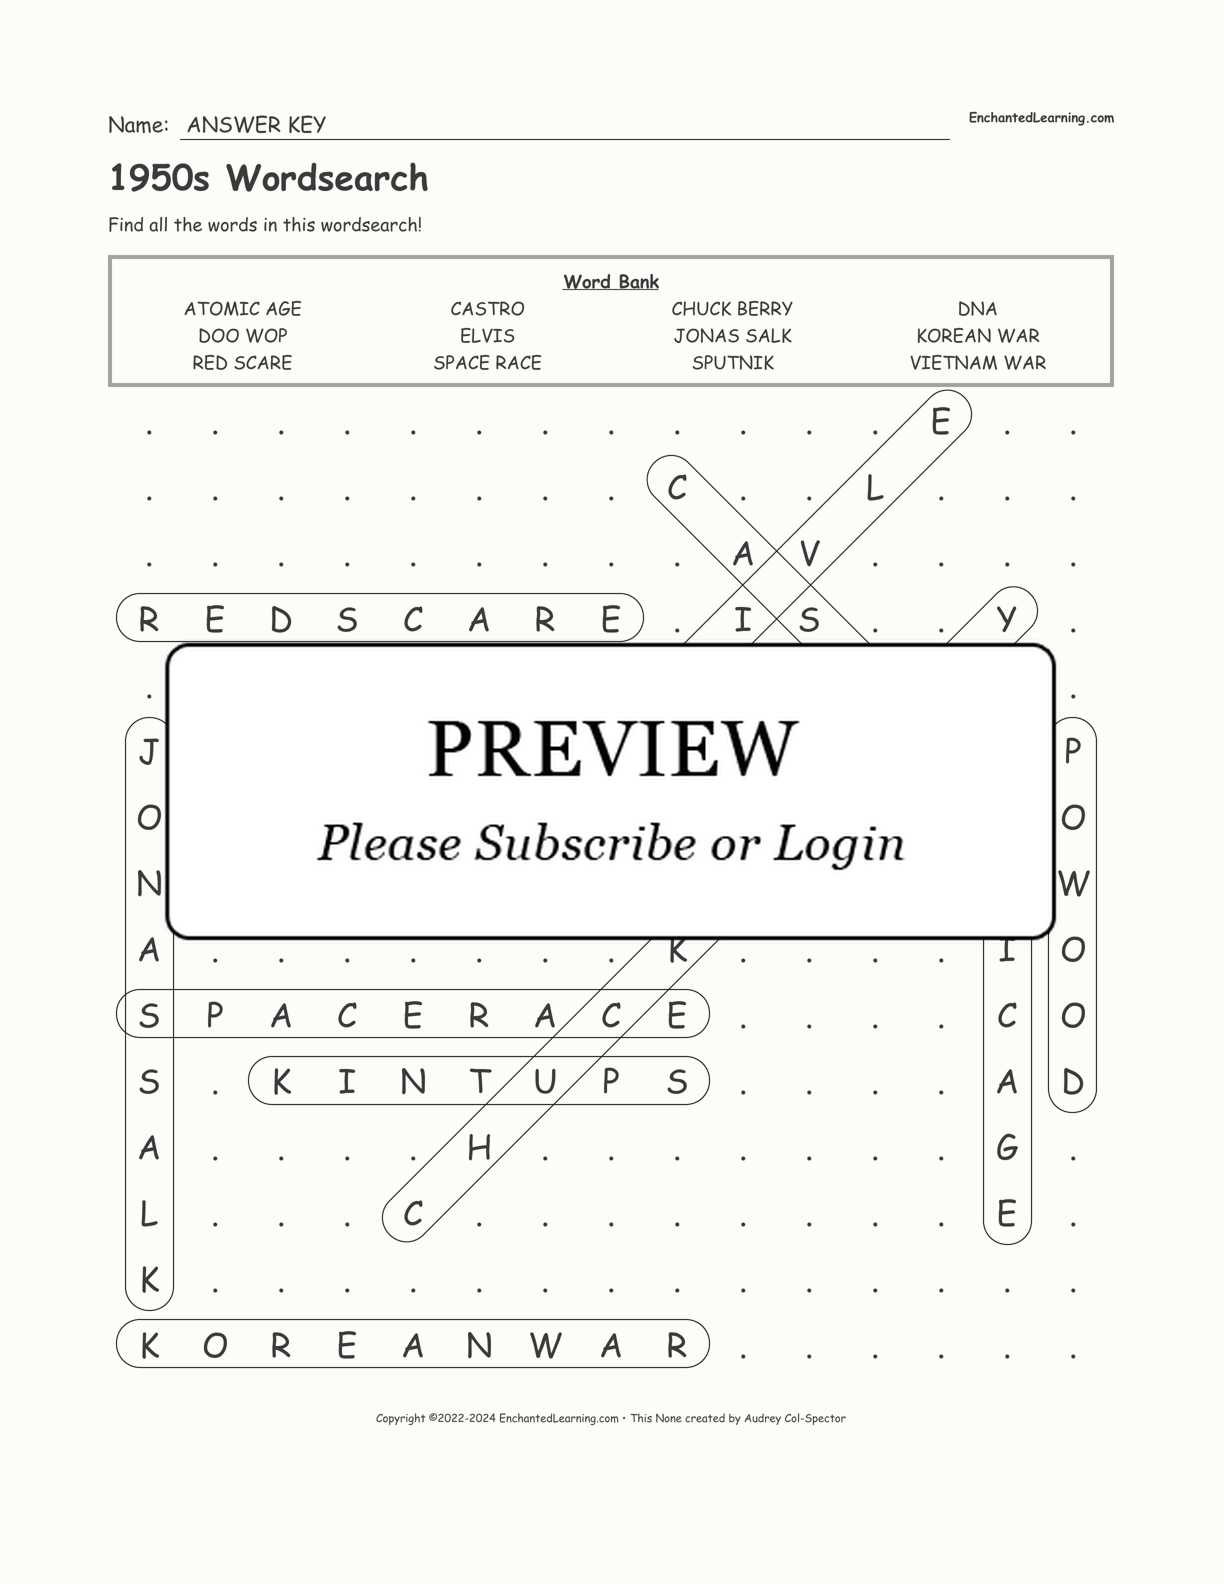 1950s Wordsearch interactive worksheet page 2